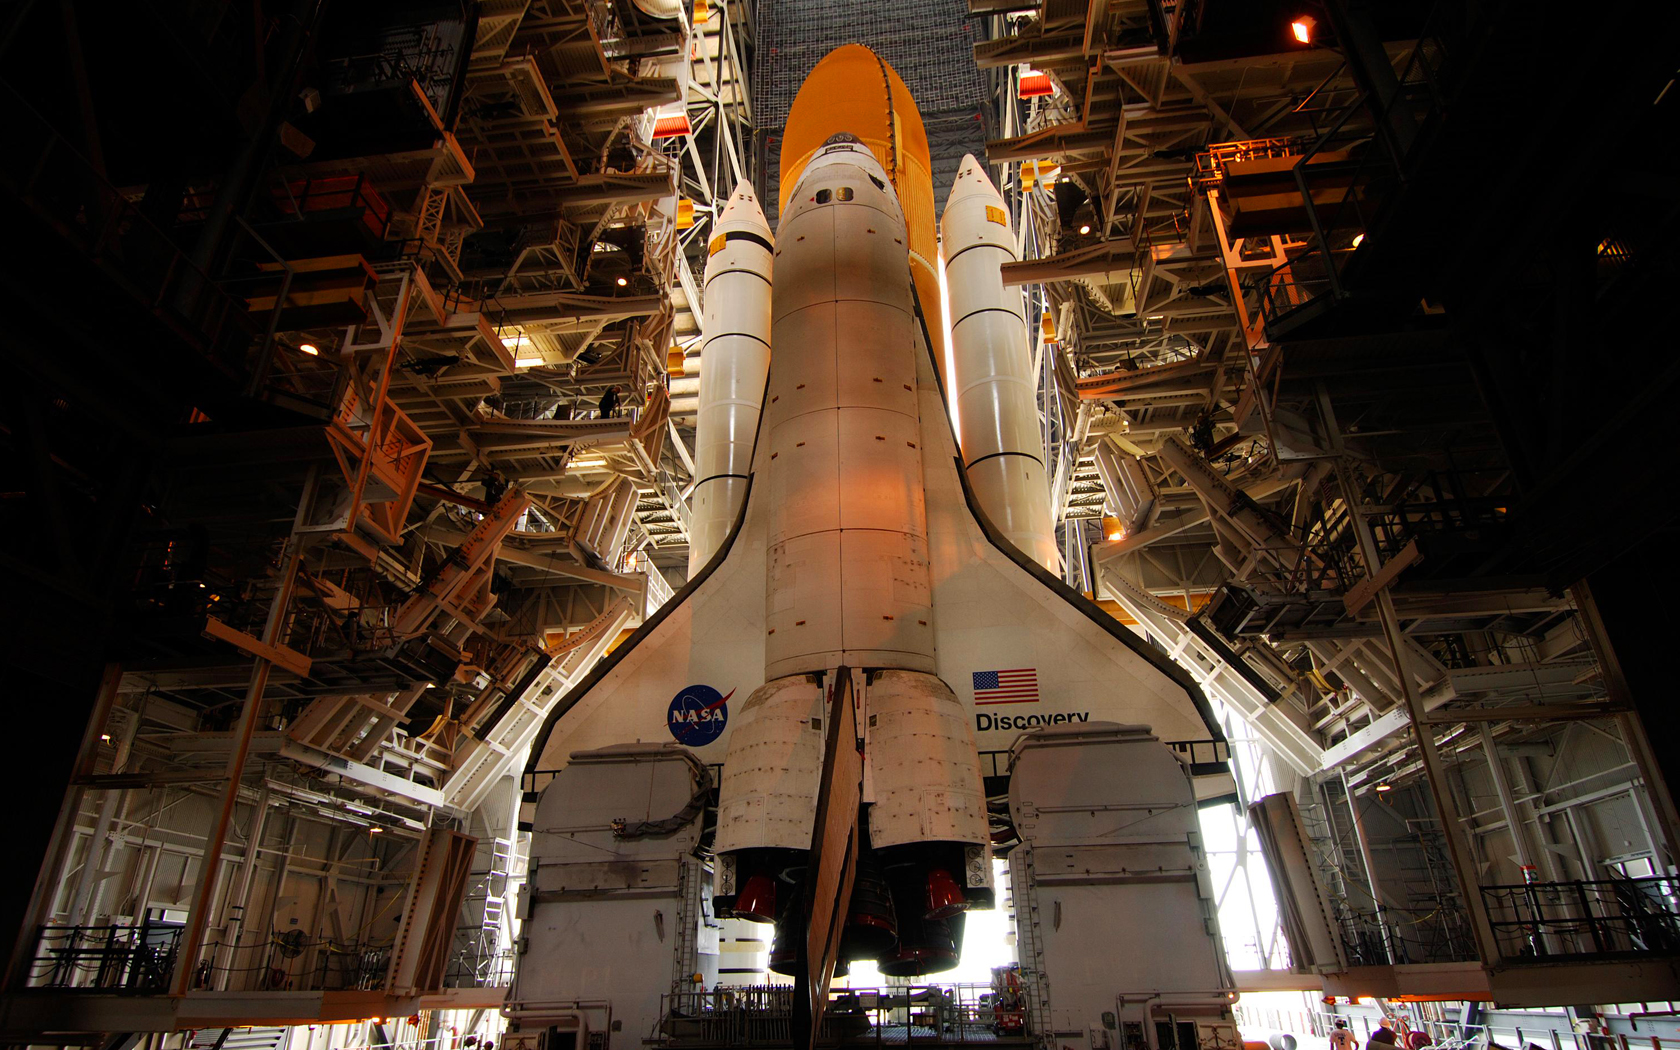 space shuttles, vehicles, space shuttle discovery